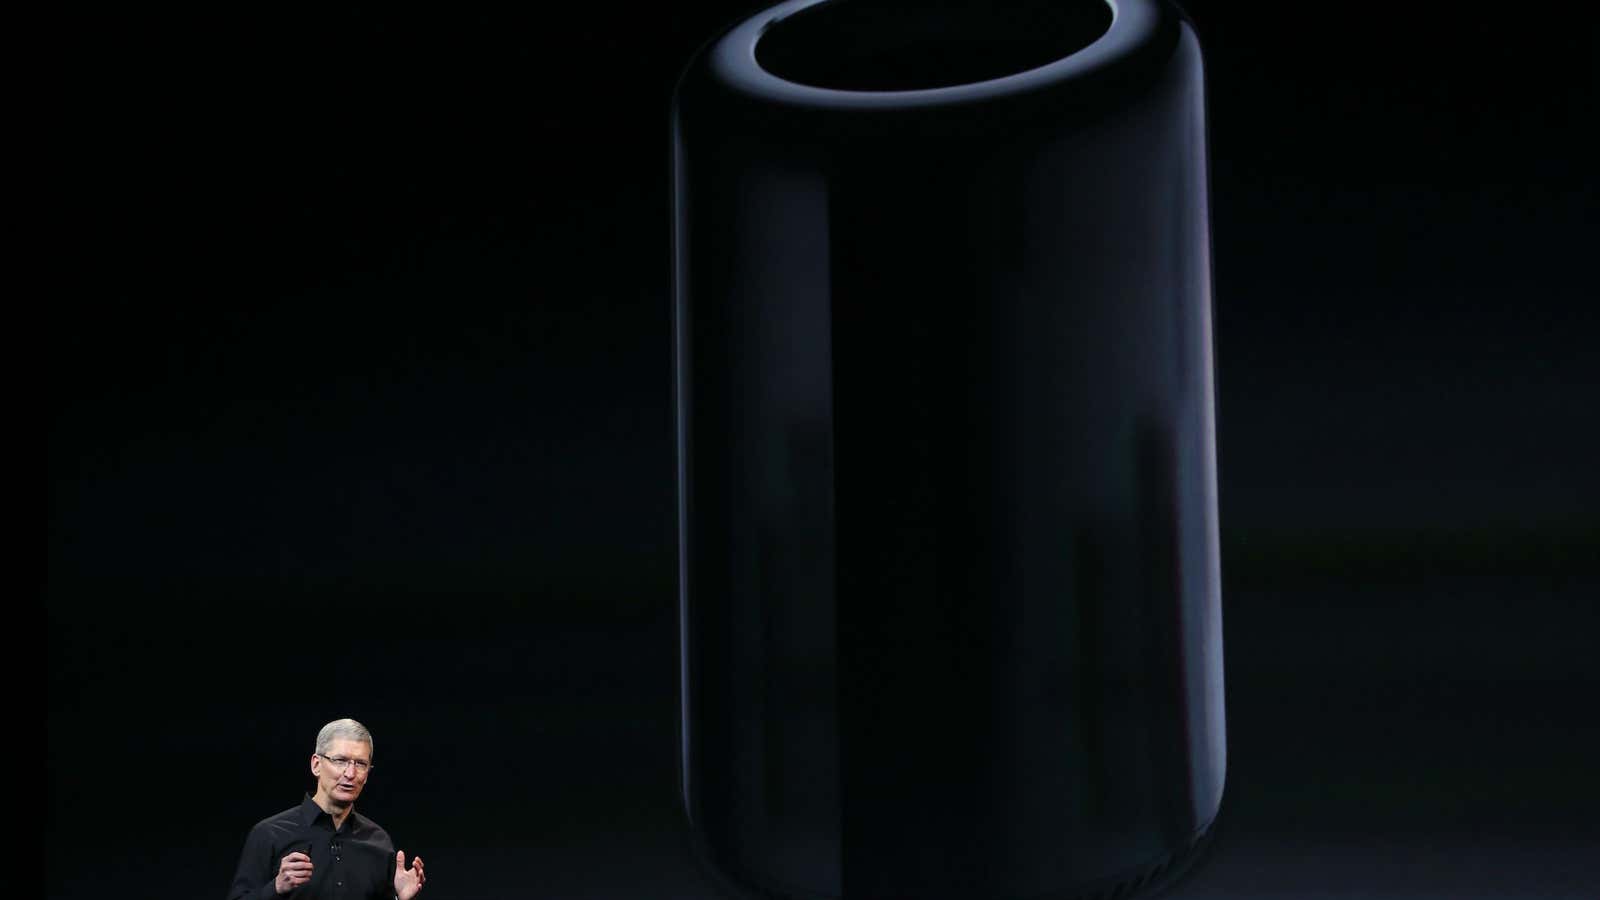 Apple’s new product category is sort of a black hole right now.